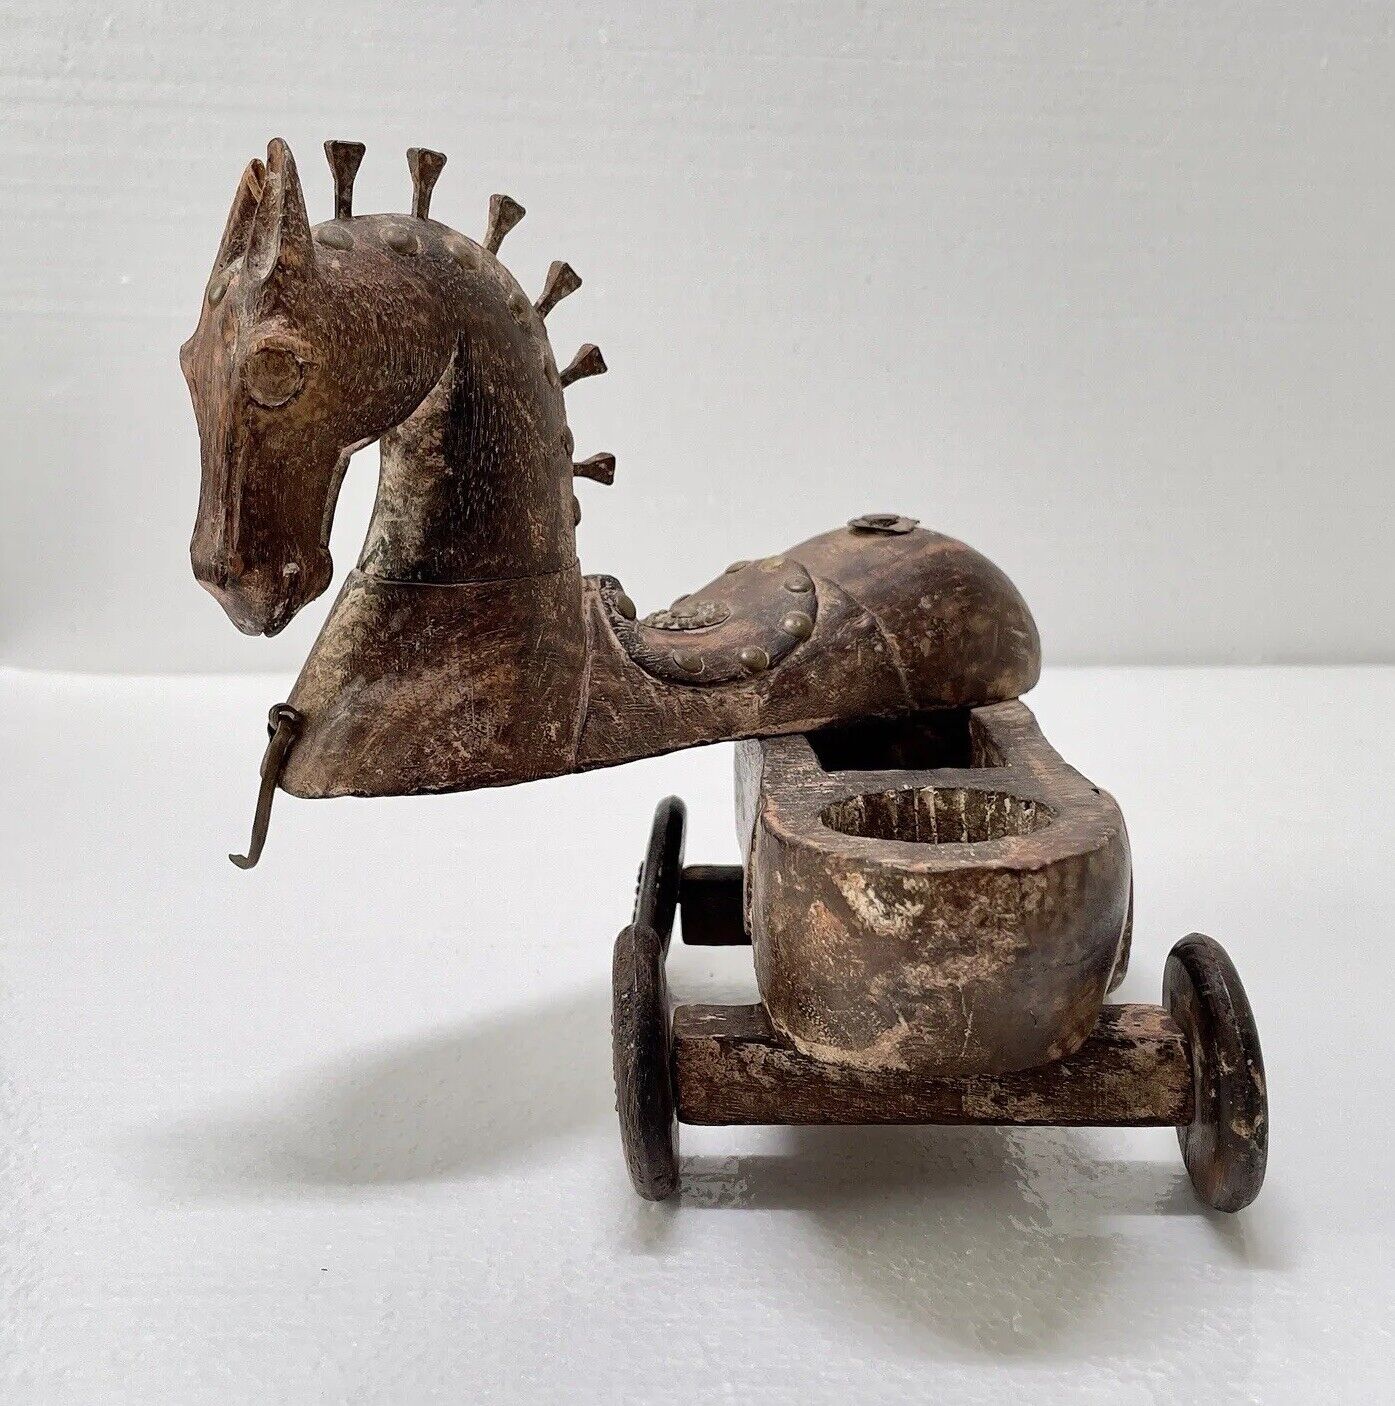 Vintage Trojan Horse on Wheels Toy Wood Trinket Box Opens to Hidden Compartment